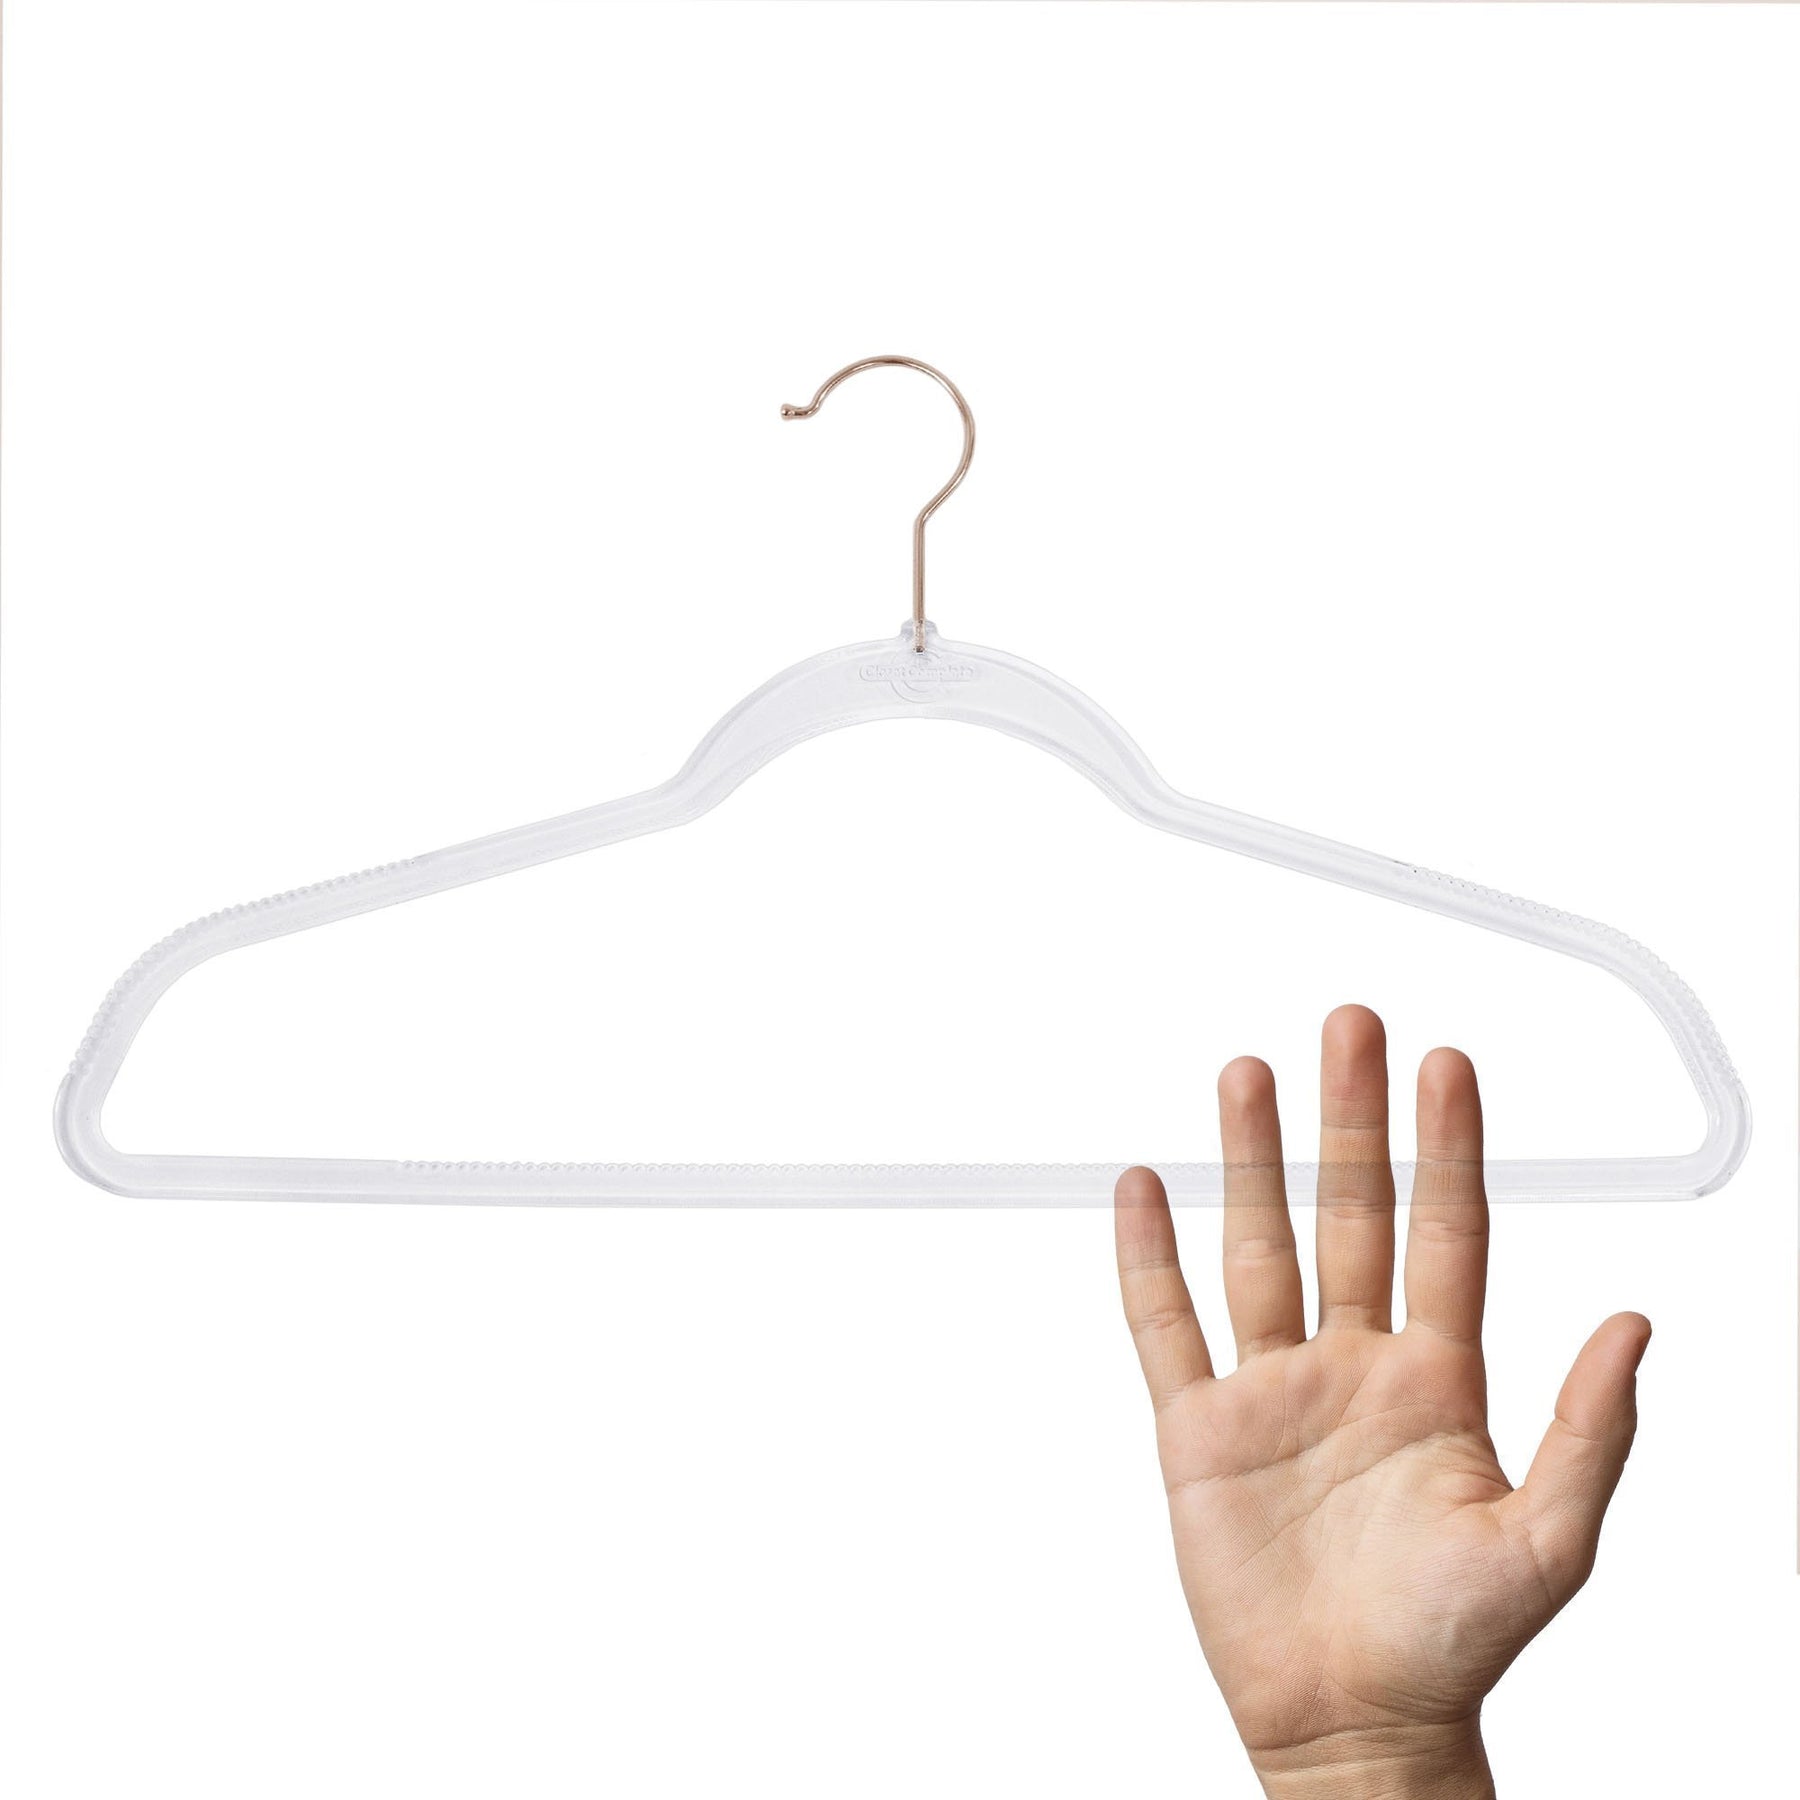 https://cdn.shopify.com/s/files/1/2993/5404/products/closet-complete-acrylic-hangers-completely-clear-non-slip-invisible-acrylic-hangers-69194s-7162334052437_1800x1800.jpg?v=1552517801